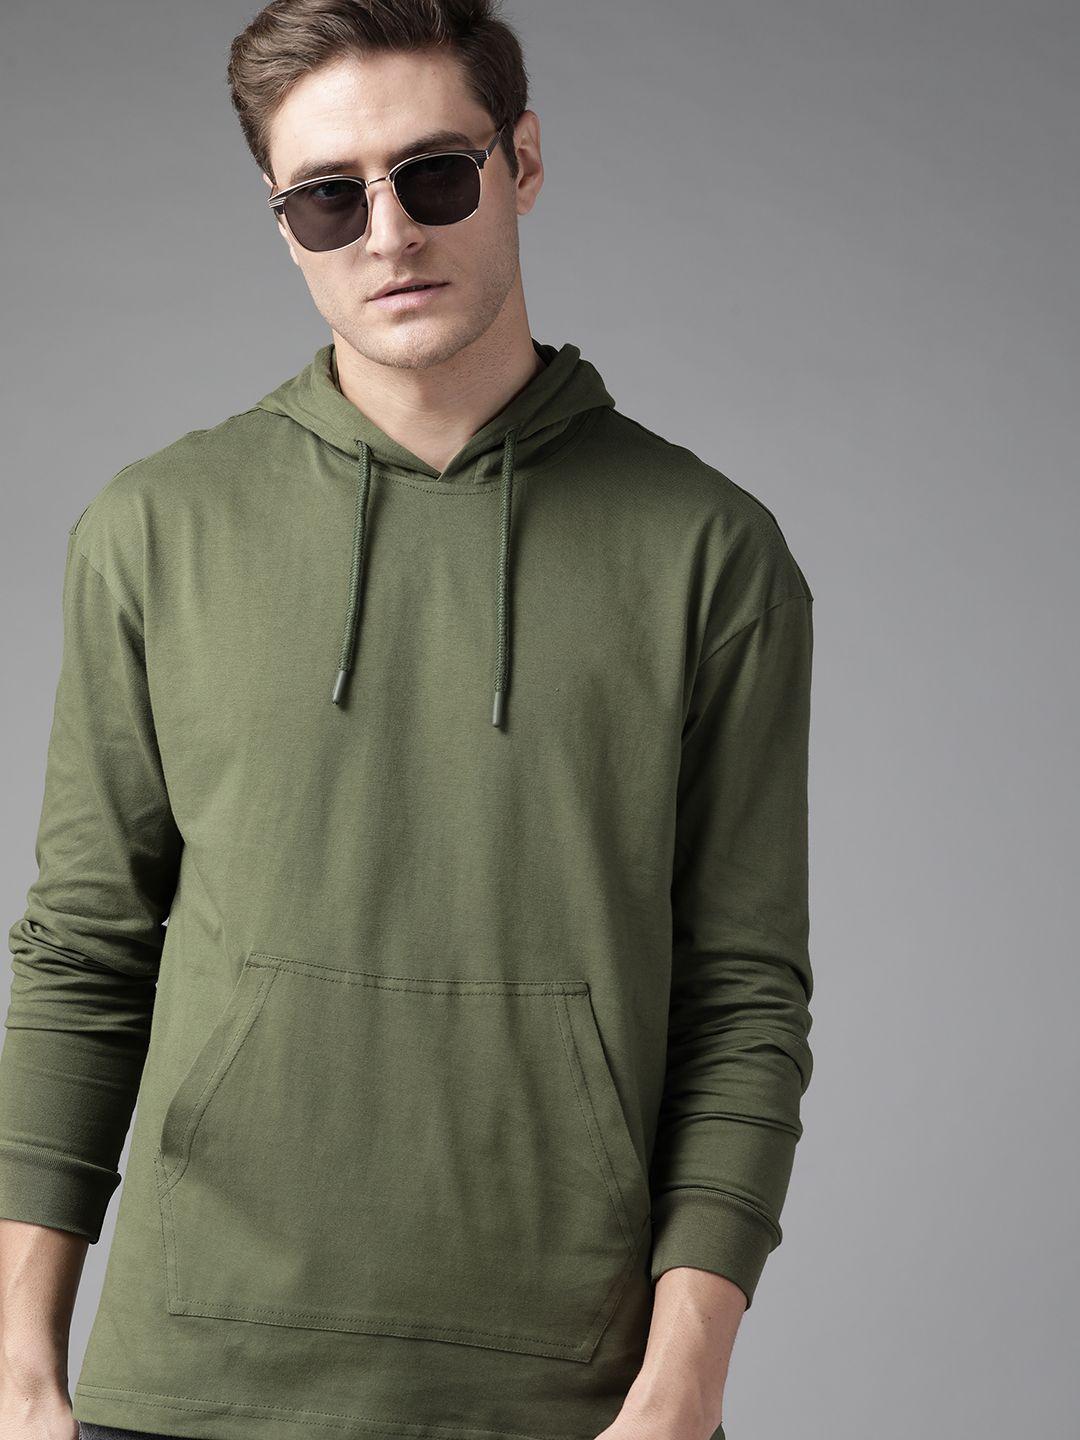 the roadster lifestyle co men olive green pure cotton solid hooded t-shirt